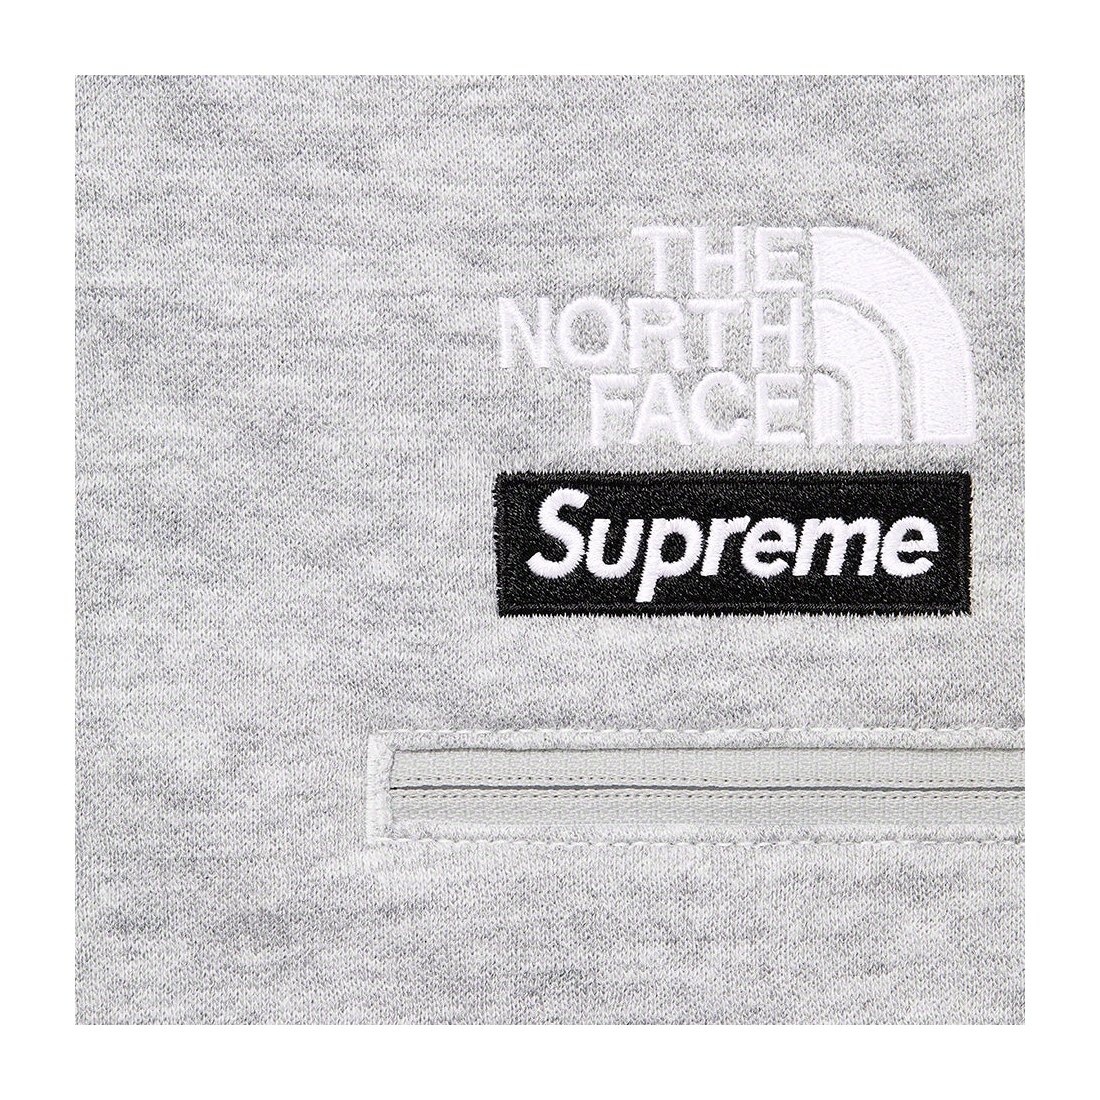 The North Face Convertible Hooded Sweatshirt - spring summer 2023 - Supreme